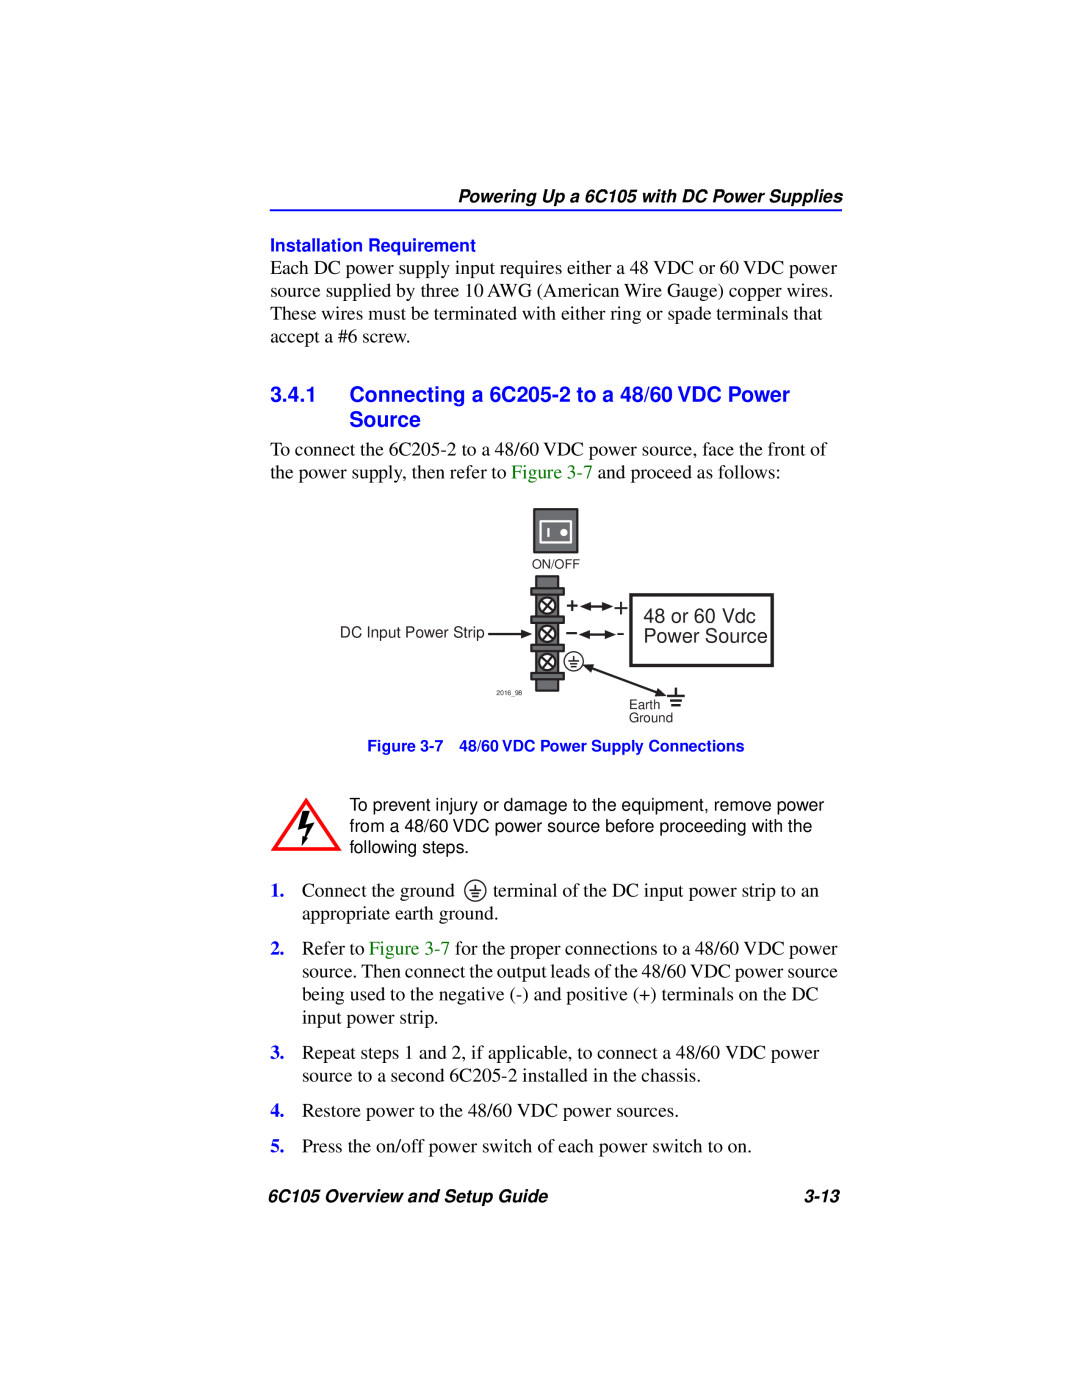 Cabletron Systems 6C105 setup guide Connecting a 6C205-2 to a 48/60 VDC Power Source 